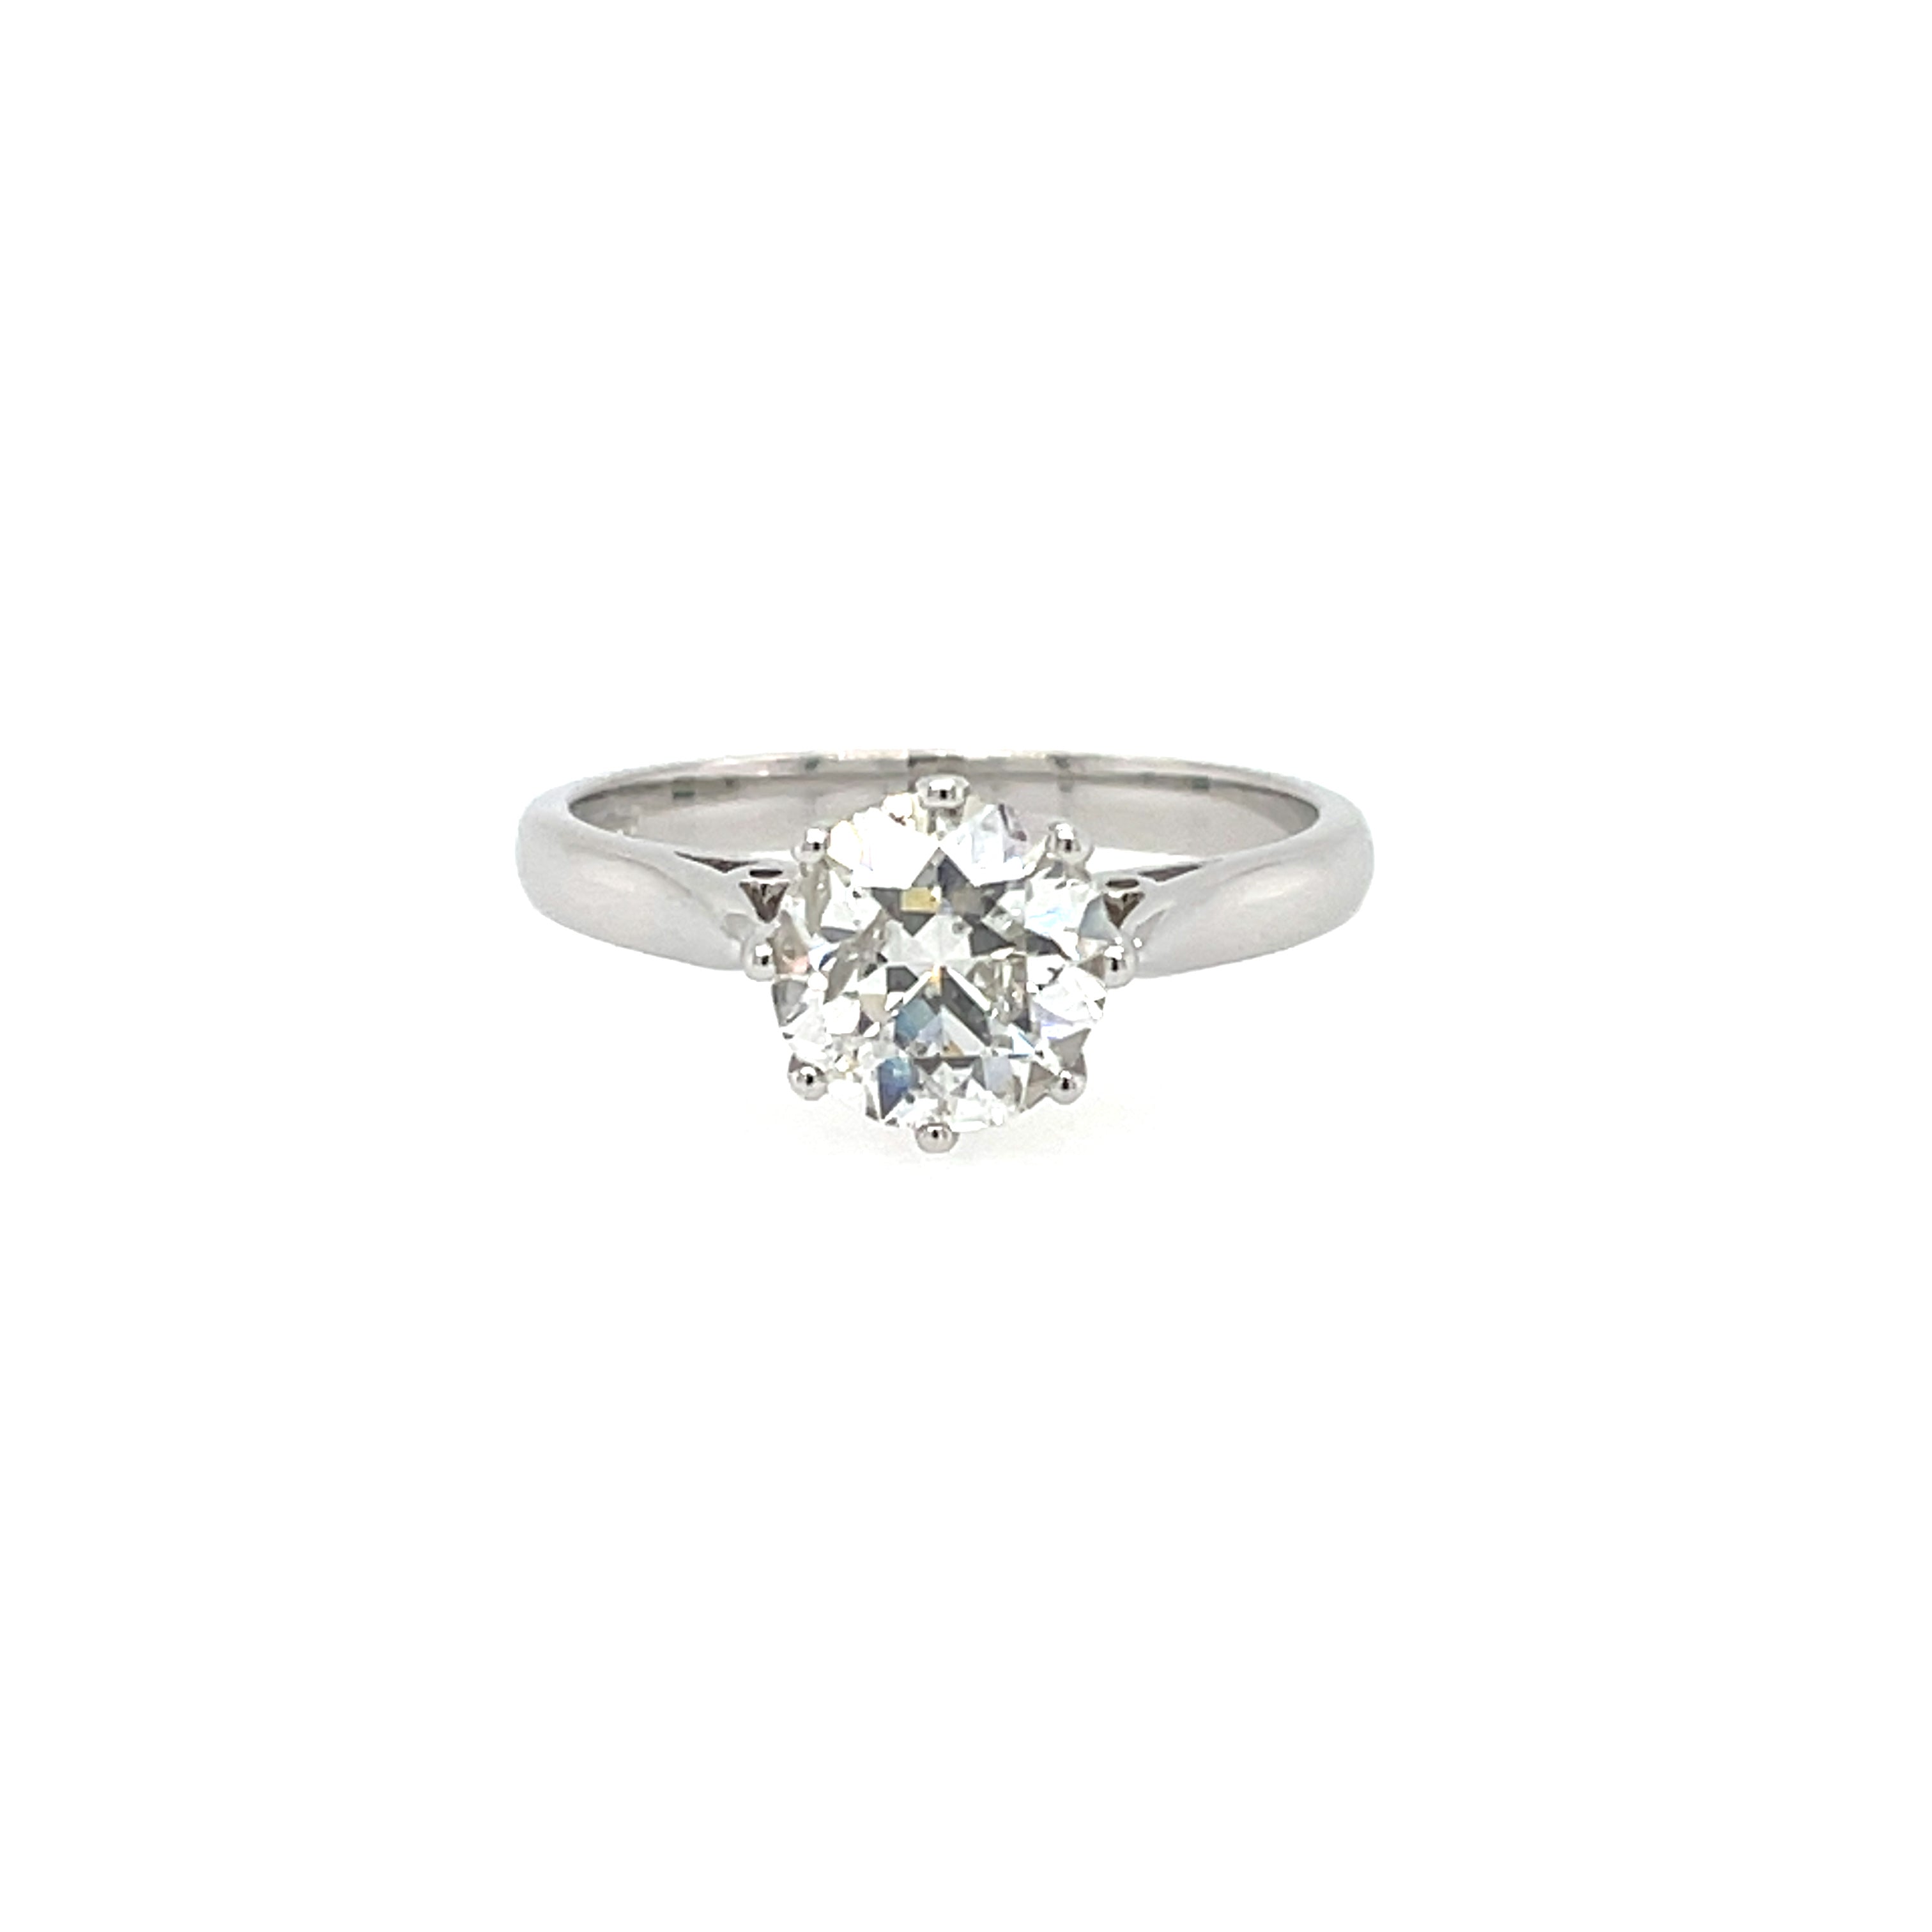 18ct White Gold 1.73ct Old European Cut Diamond Solitaire Ring SOLD